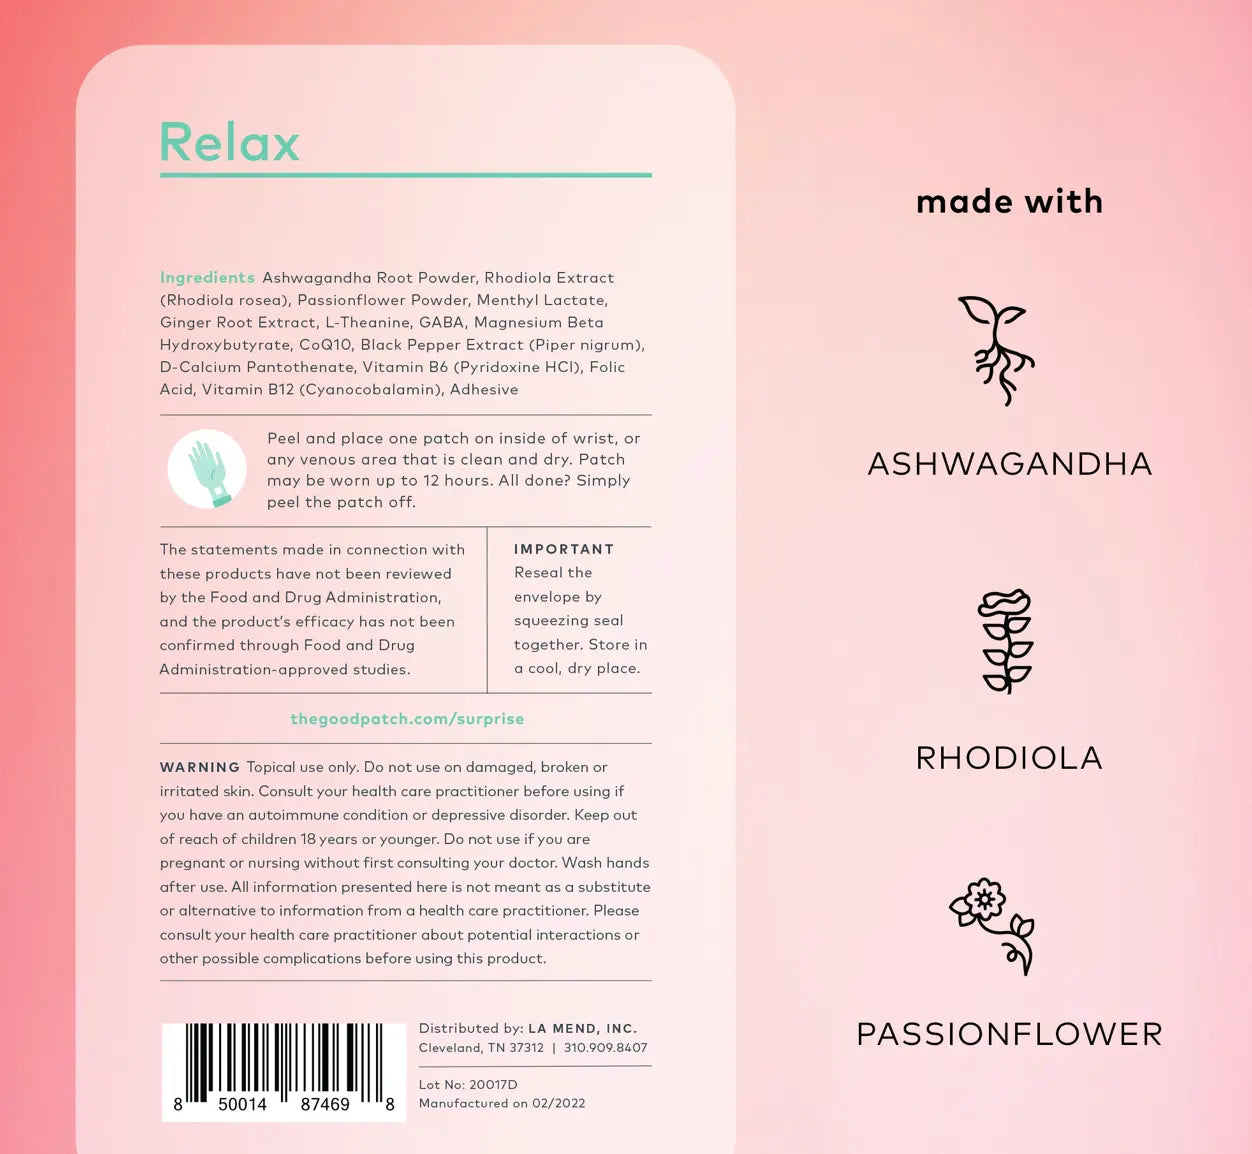 The Good Patch Plant-Infused Relax Patch Pack